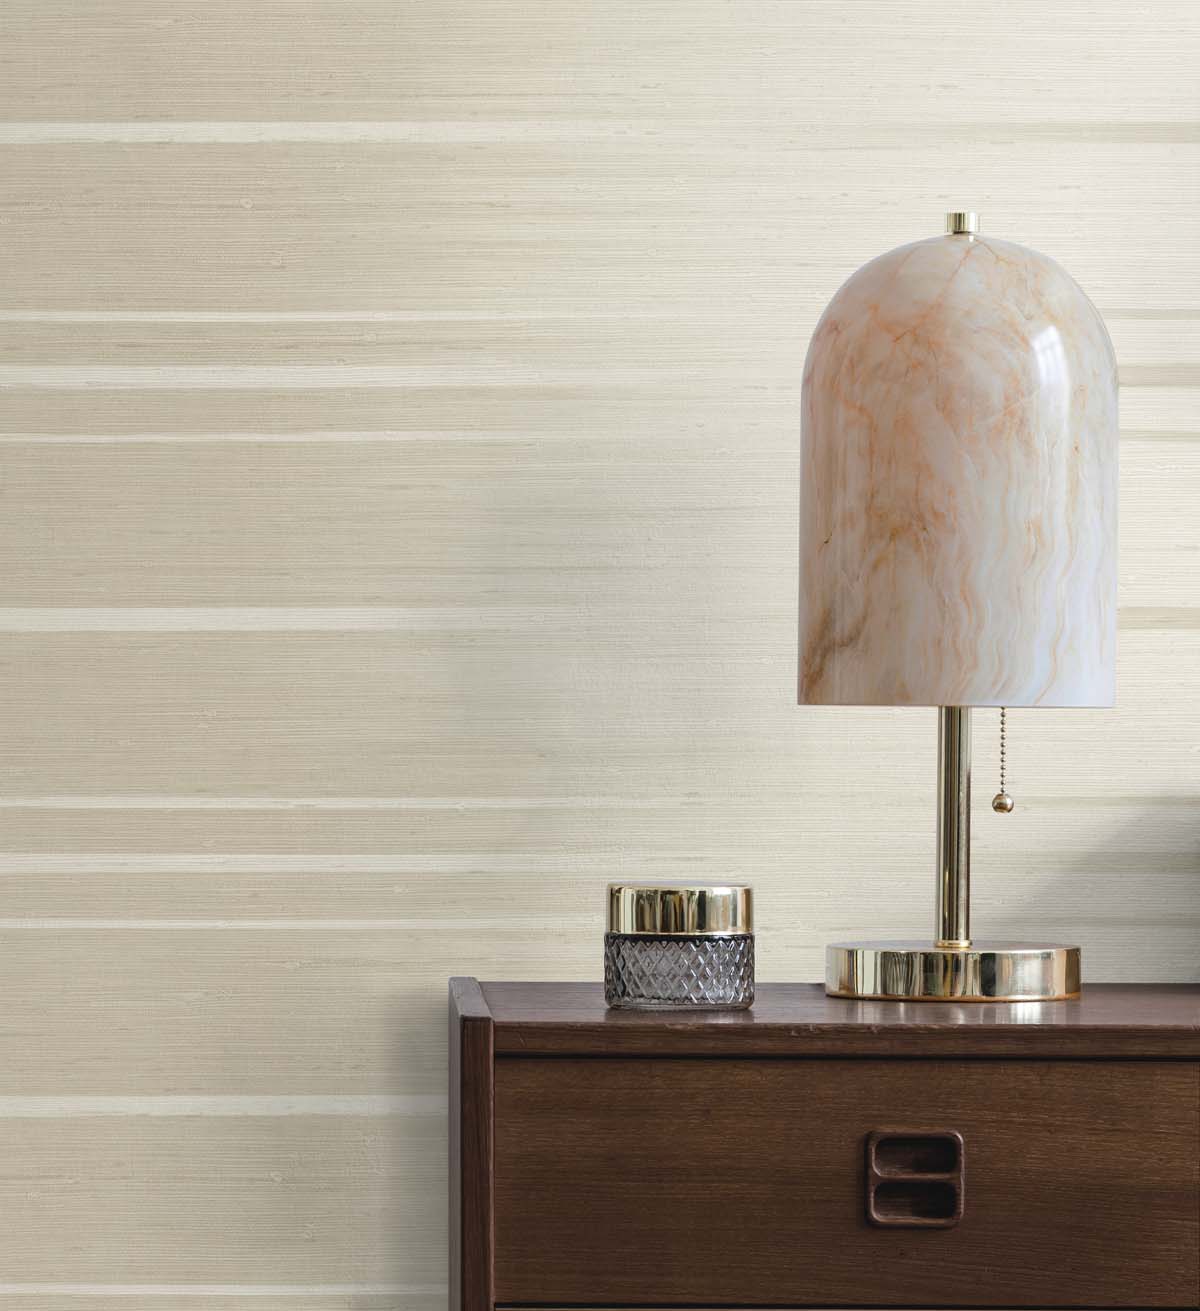 Brown Grasscloth Wallpaper with a desk lamp on a nightstand